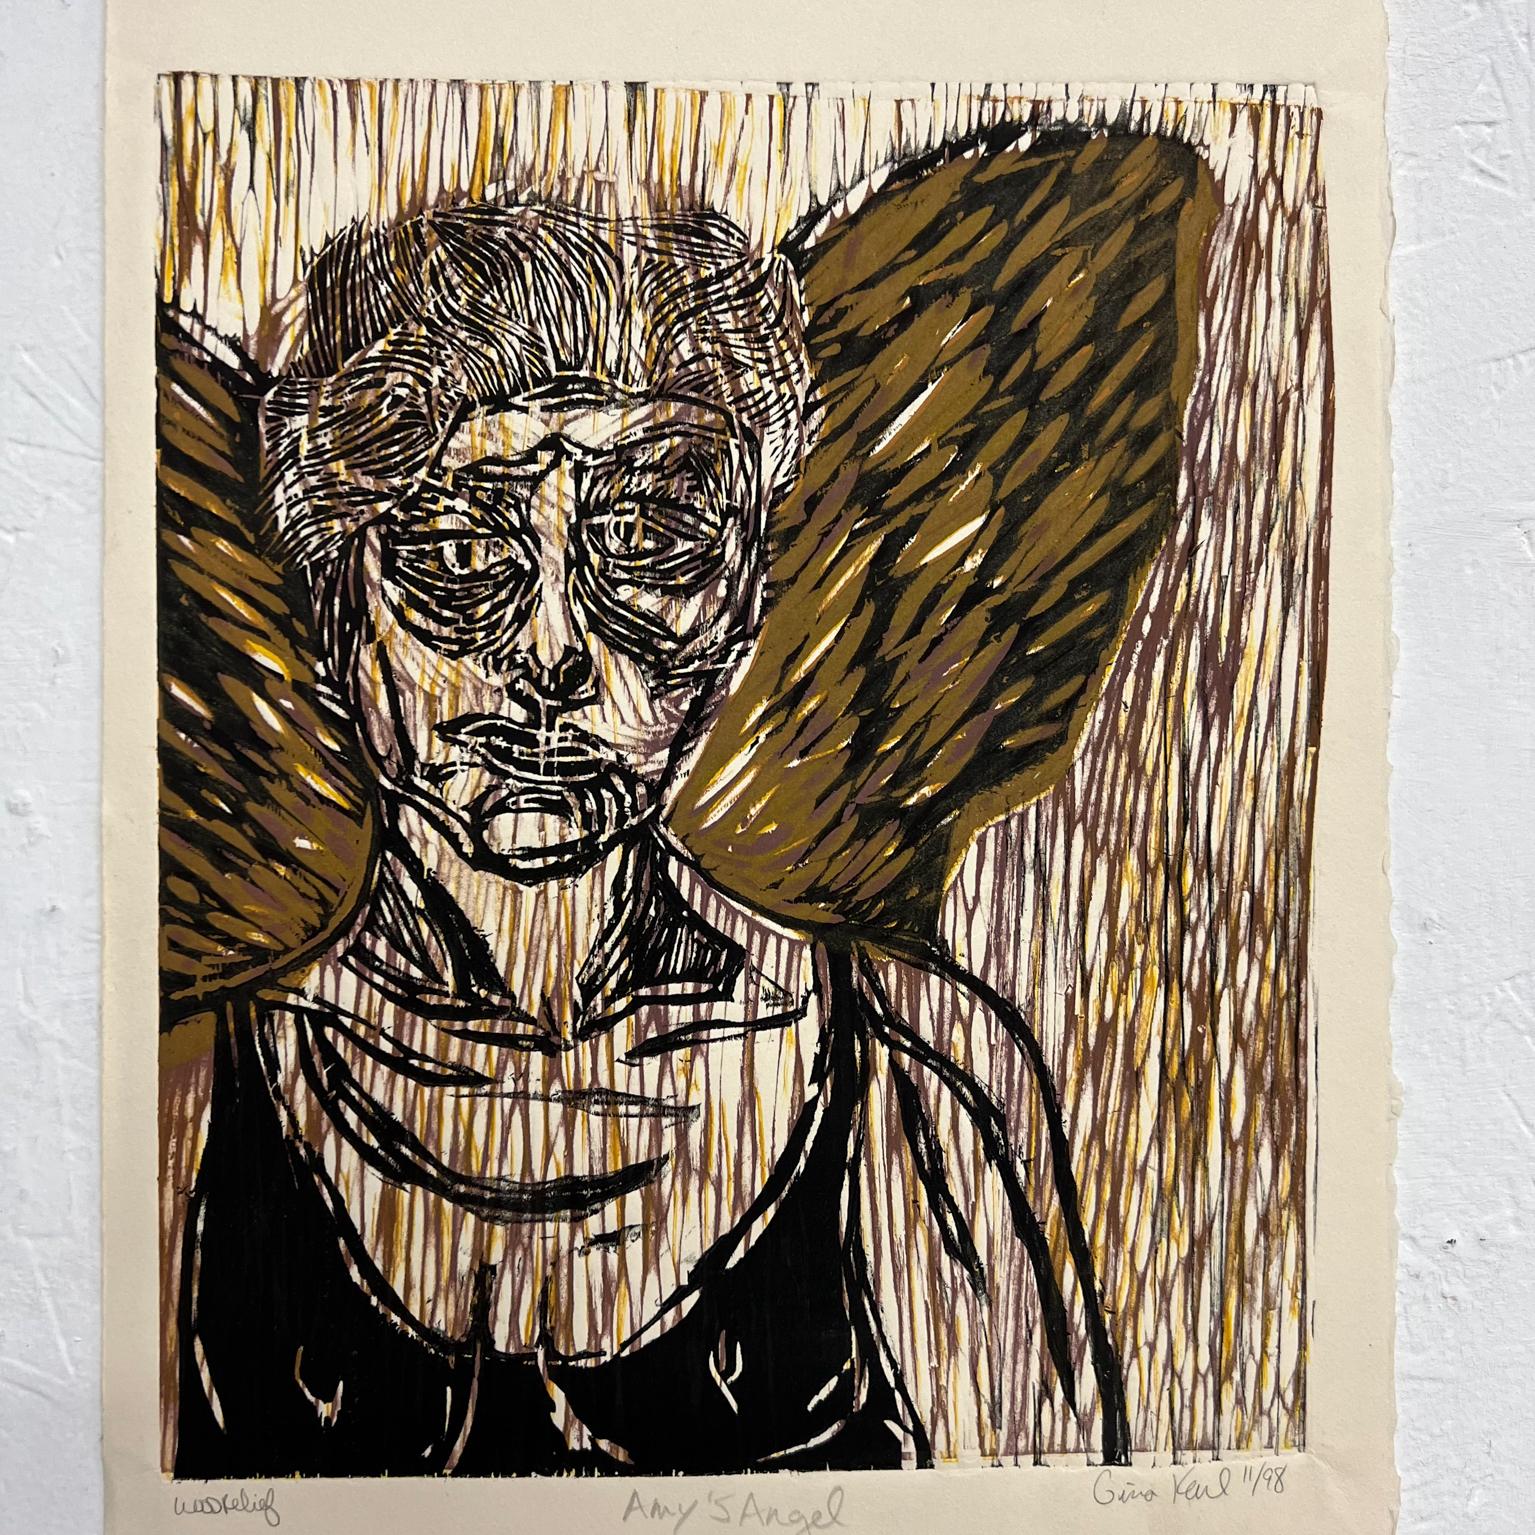 Modern Art by Gina Kail Wood Relief Block Print Amy's Angel 11/98 For Sale